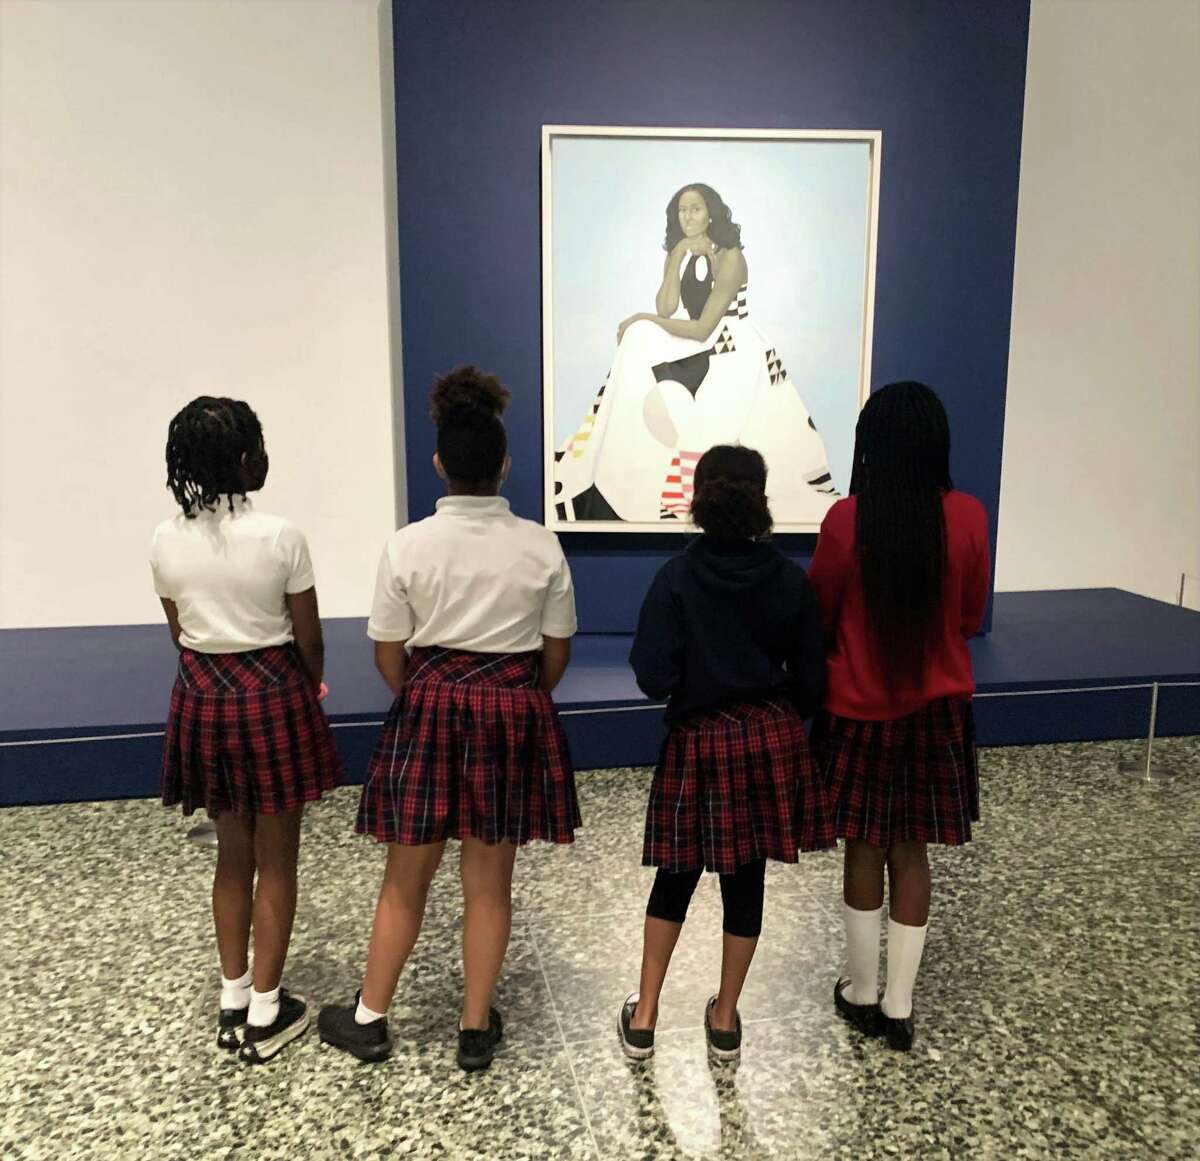 Students from The Imani School in Houston view the Obama Portrait exhibit at the Museum of Fine Arts, Houston.